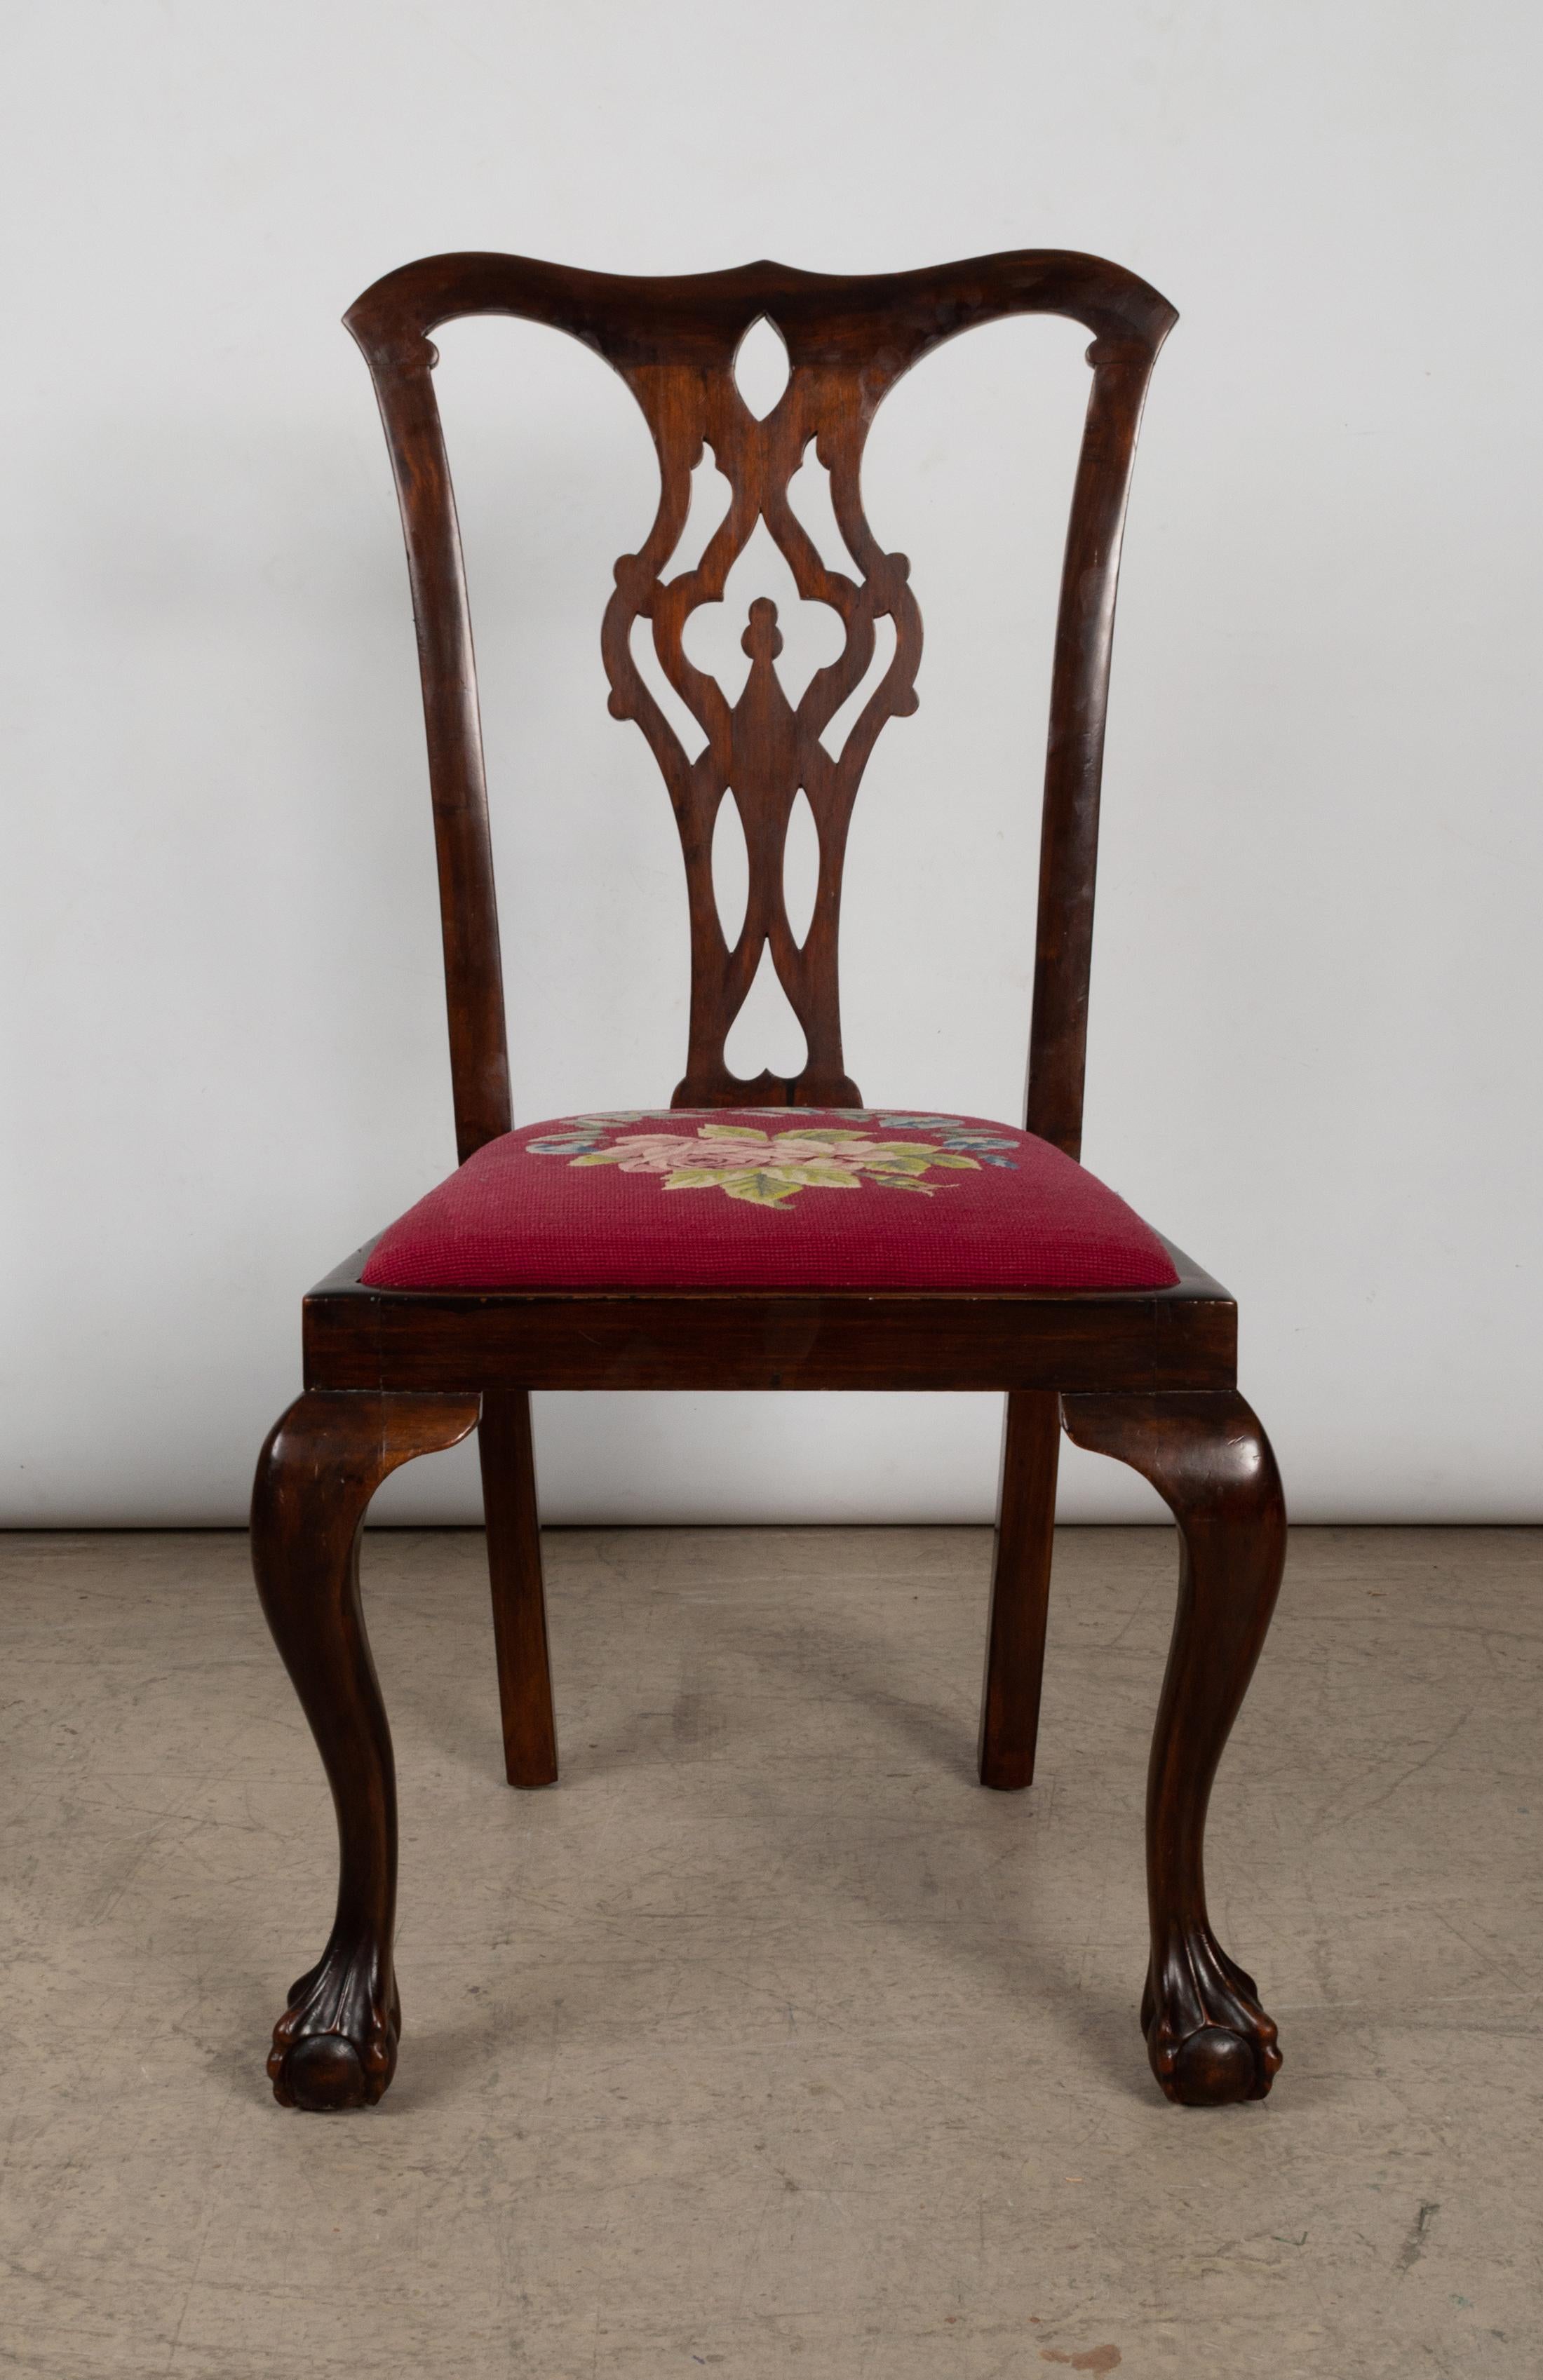 4 Antique English 19th Century Chippendale Revival Mahogany Chairs For Sale 16